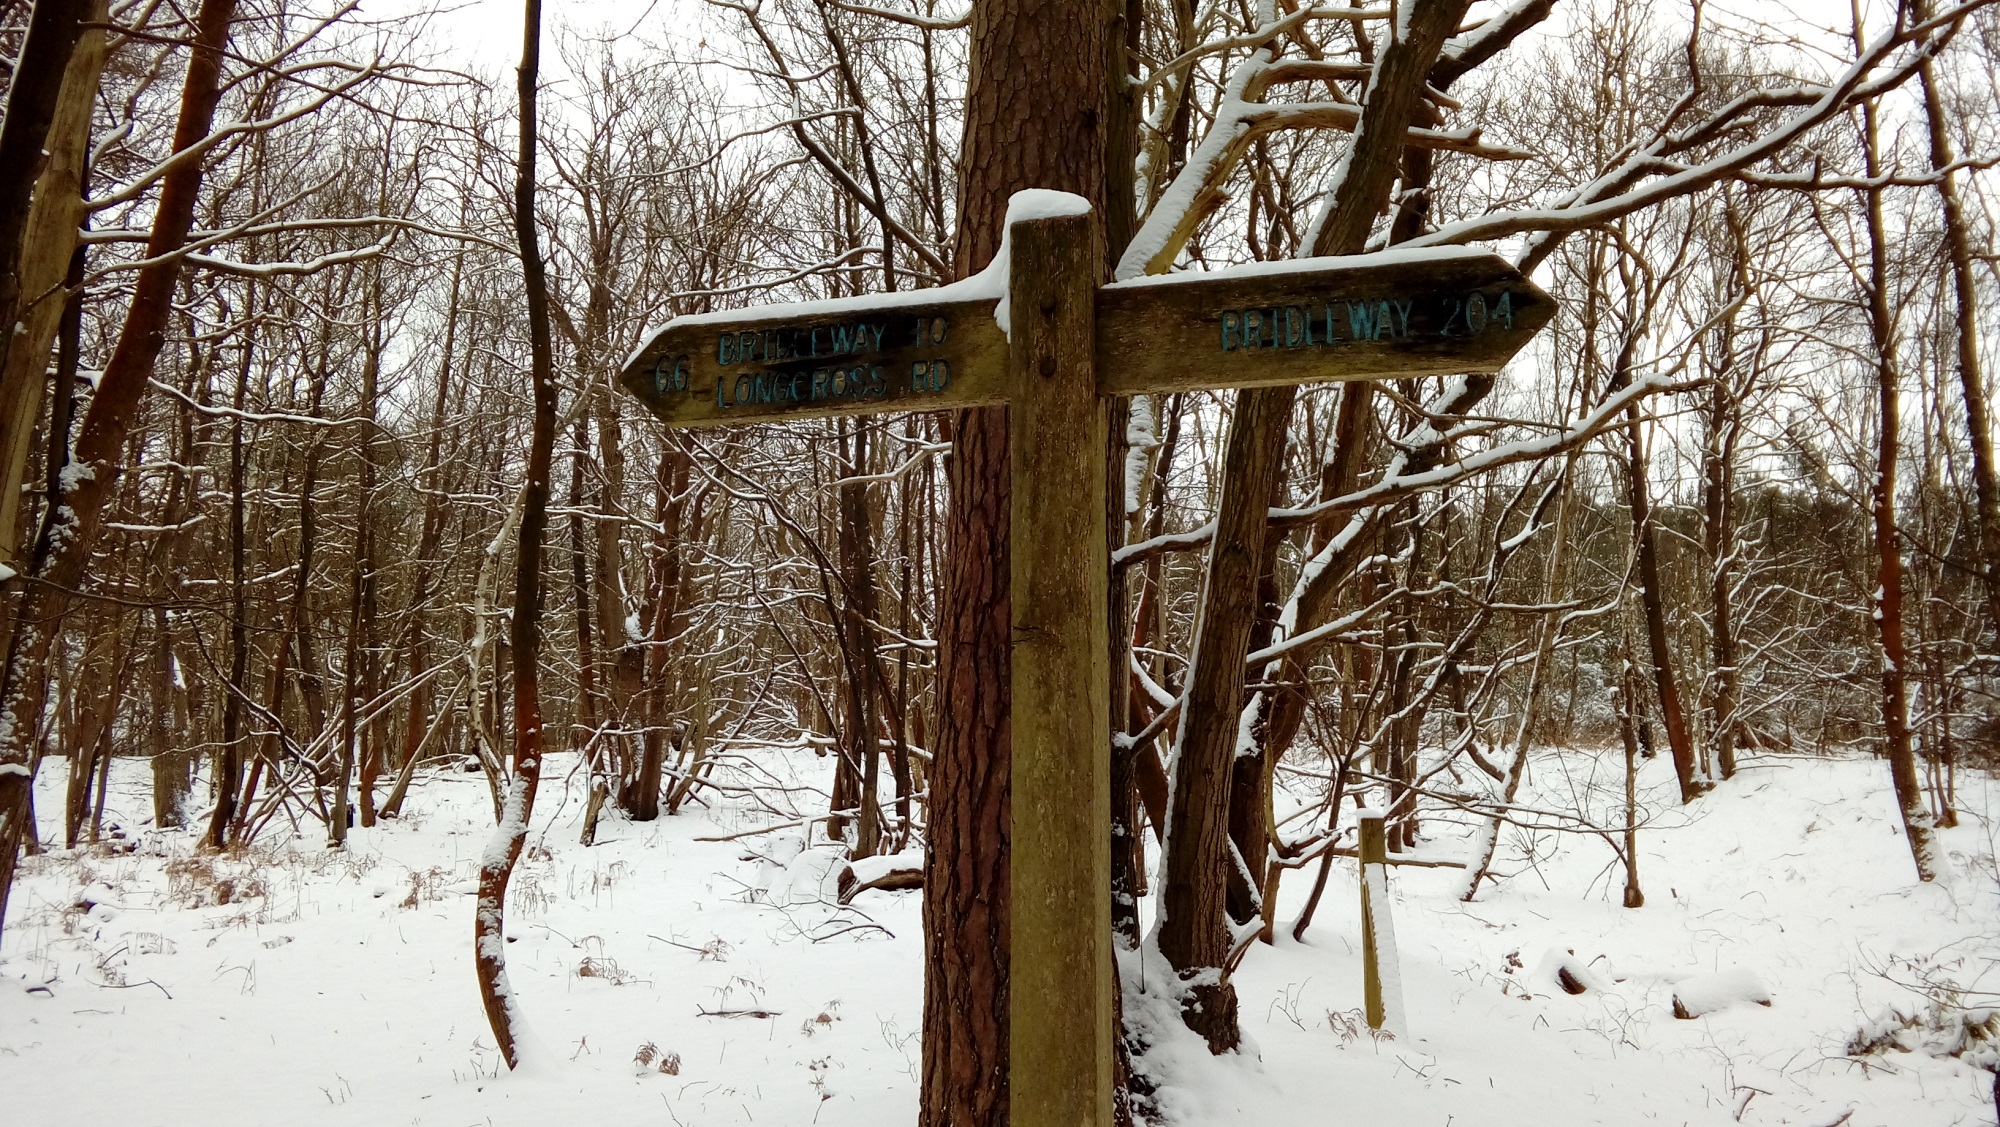 Public footpath sign in winter snow